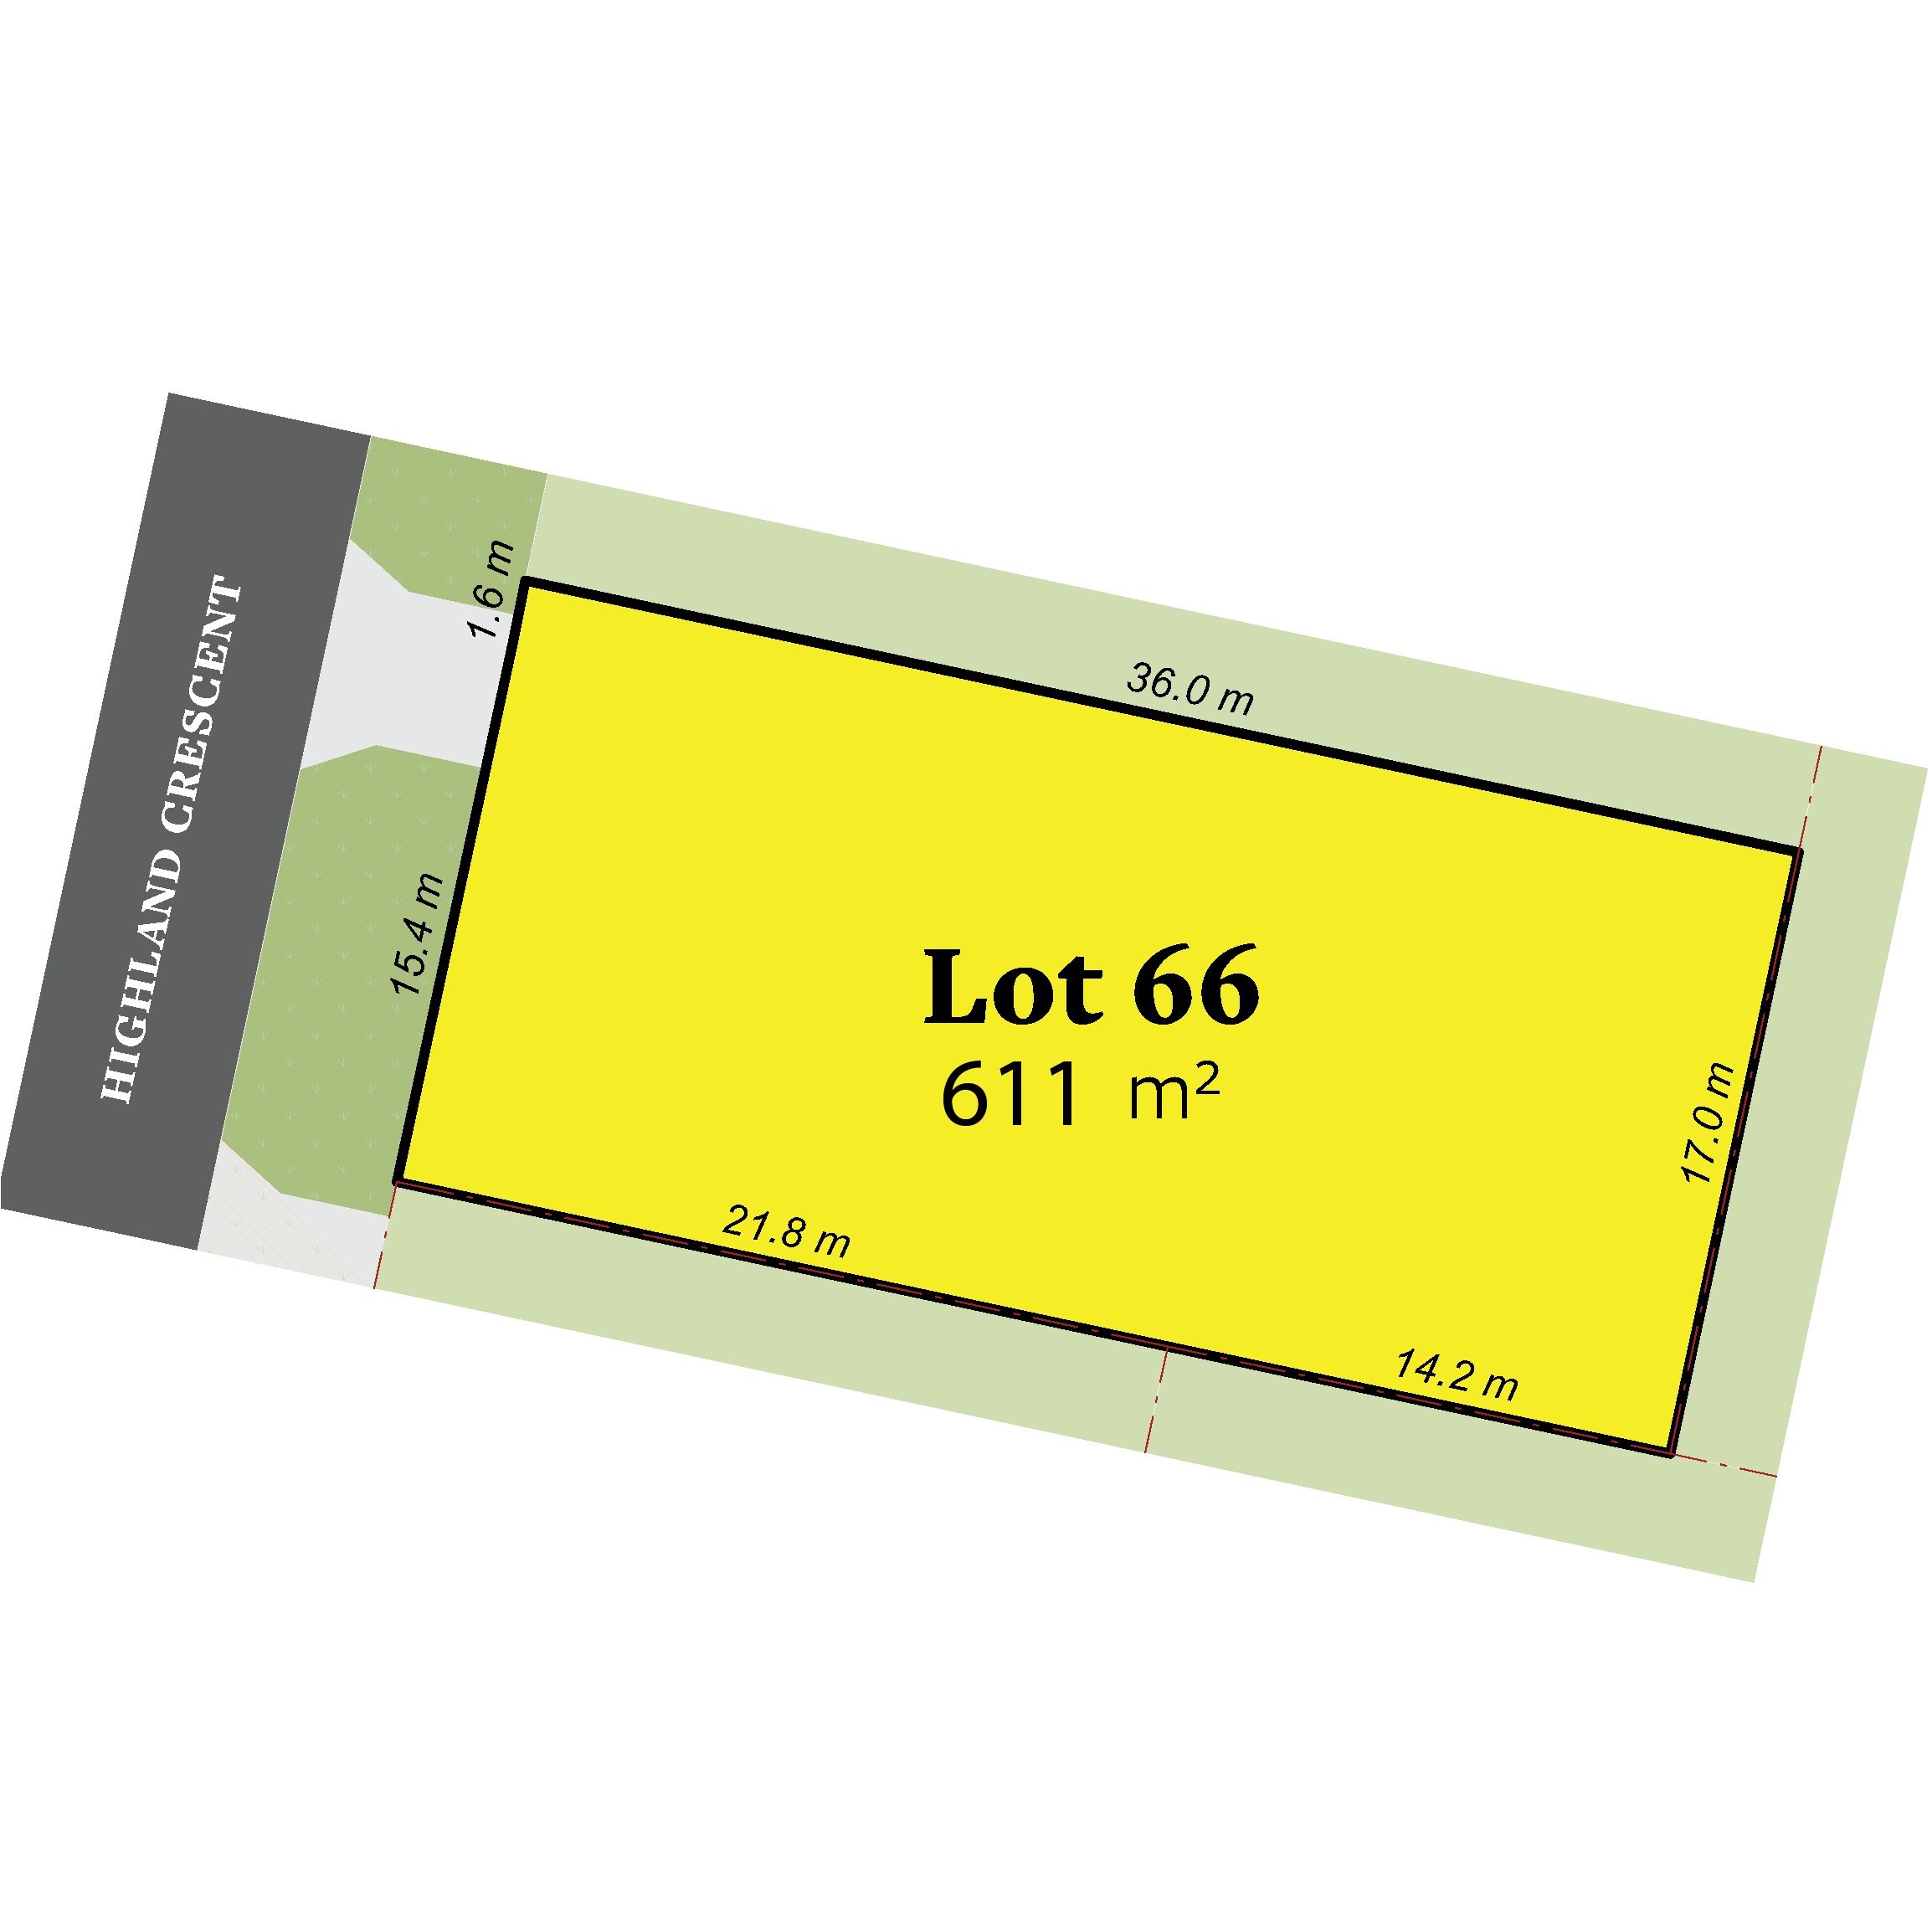 Image of Lot 66